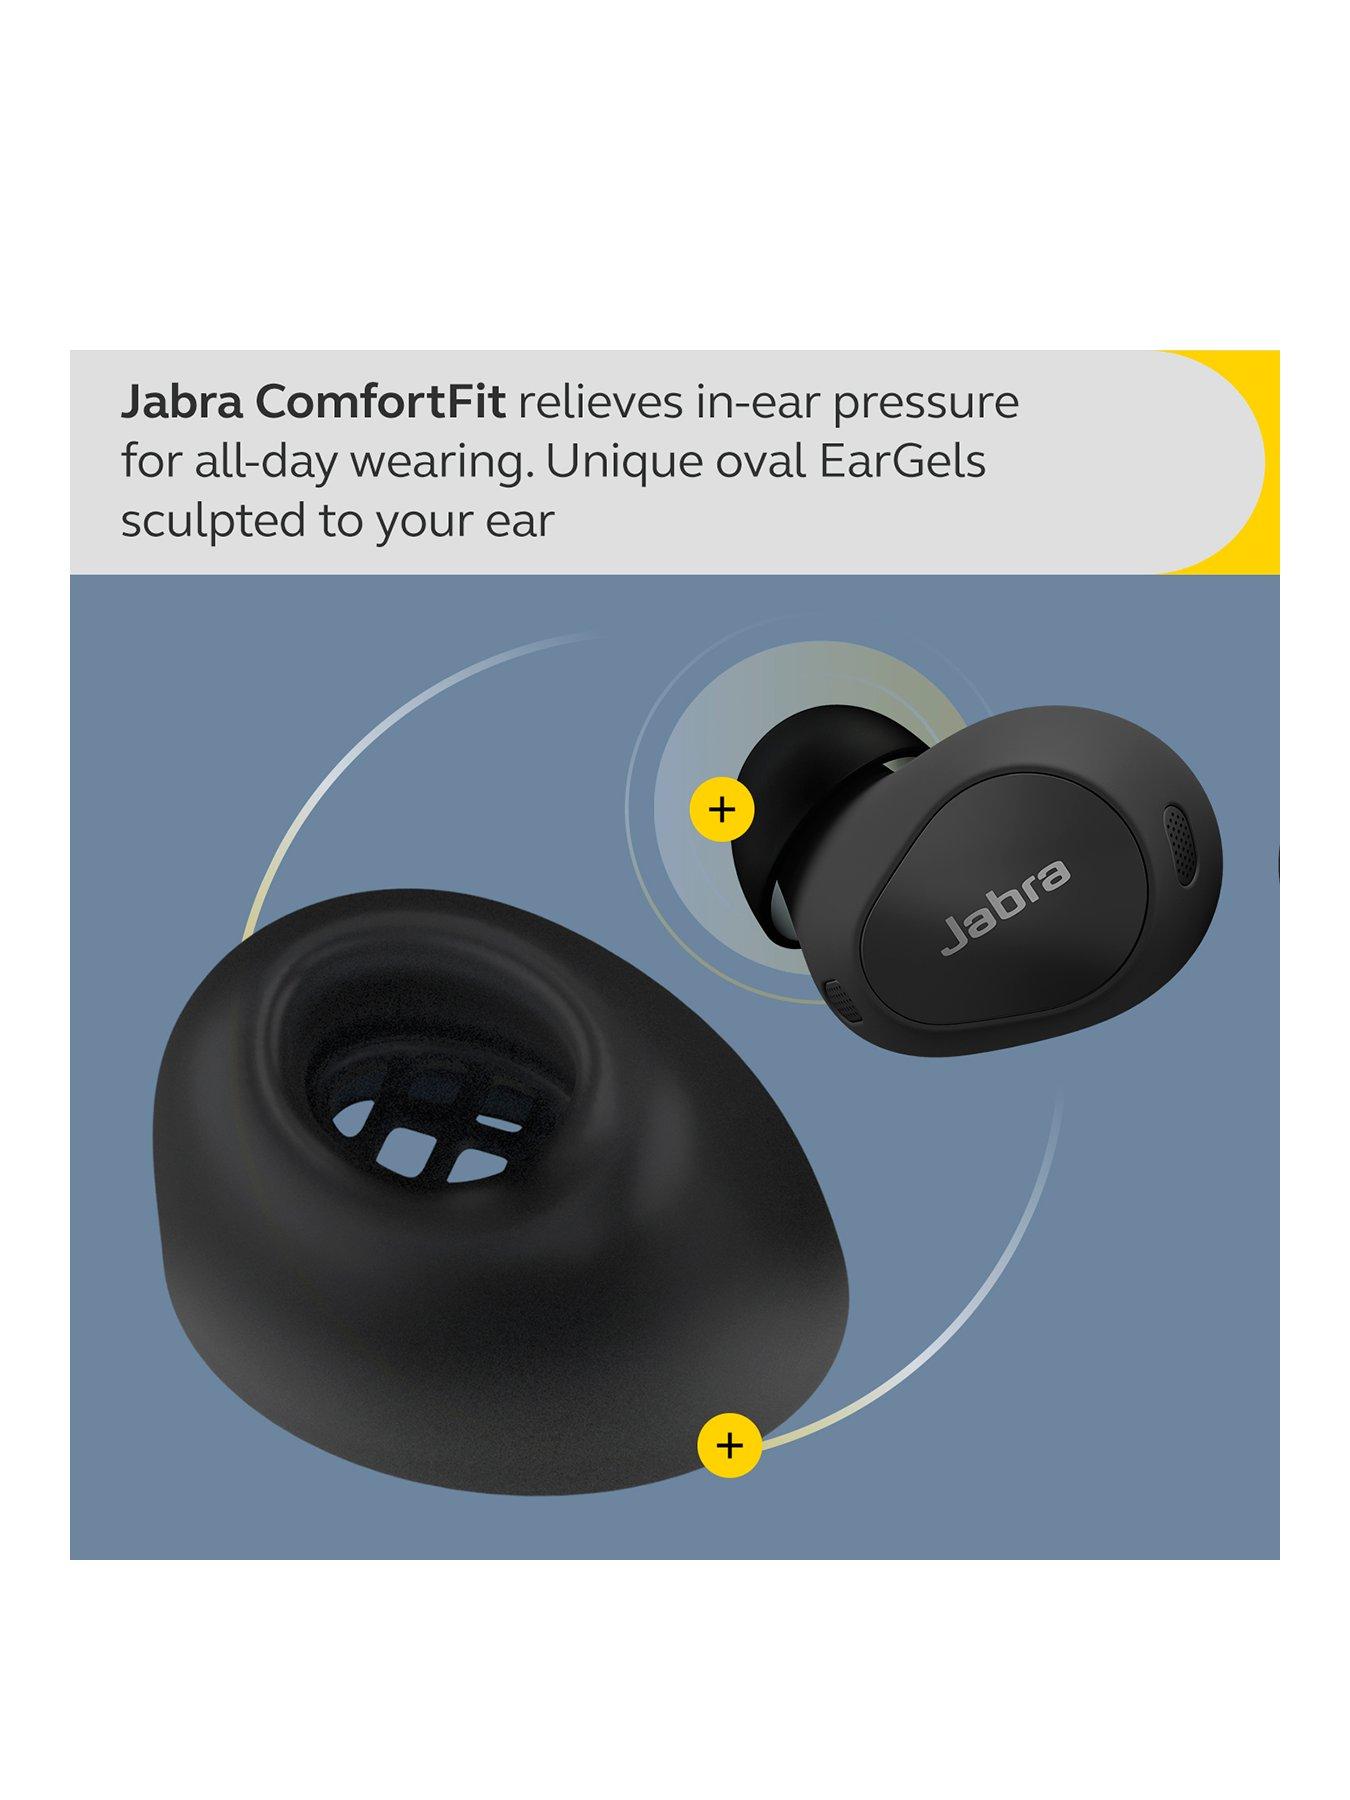 Don't miss out on the Jabra Elite 10: get yours and save 43